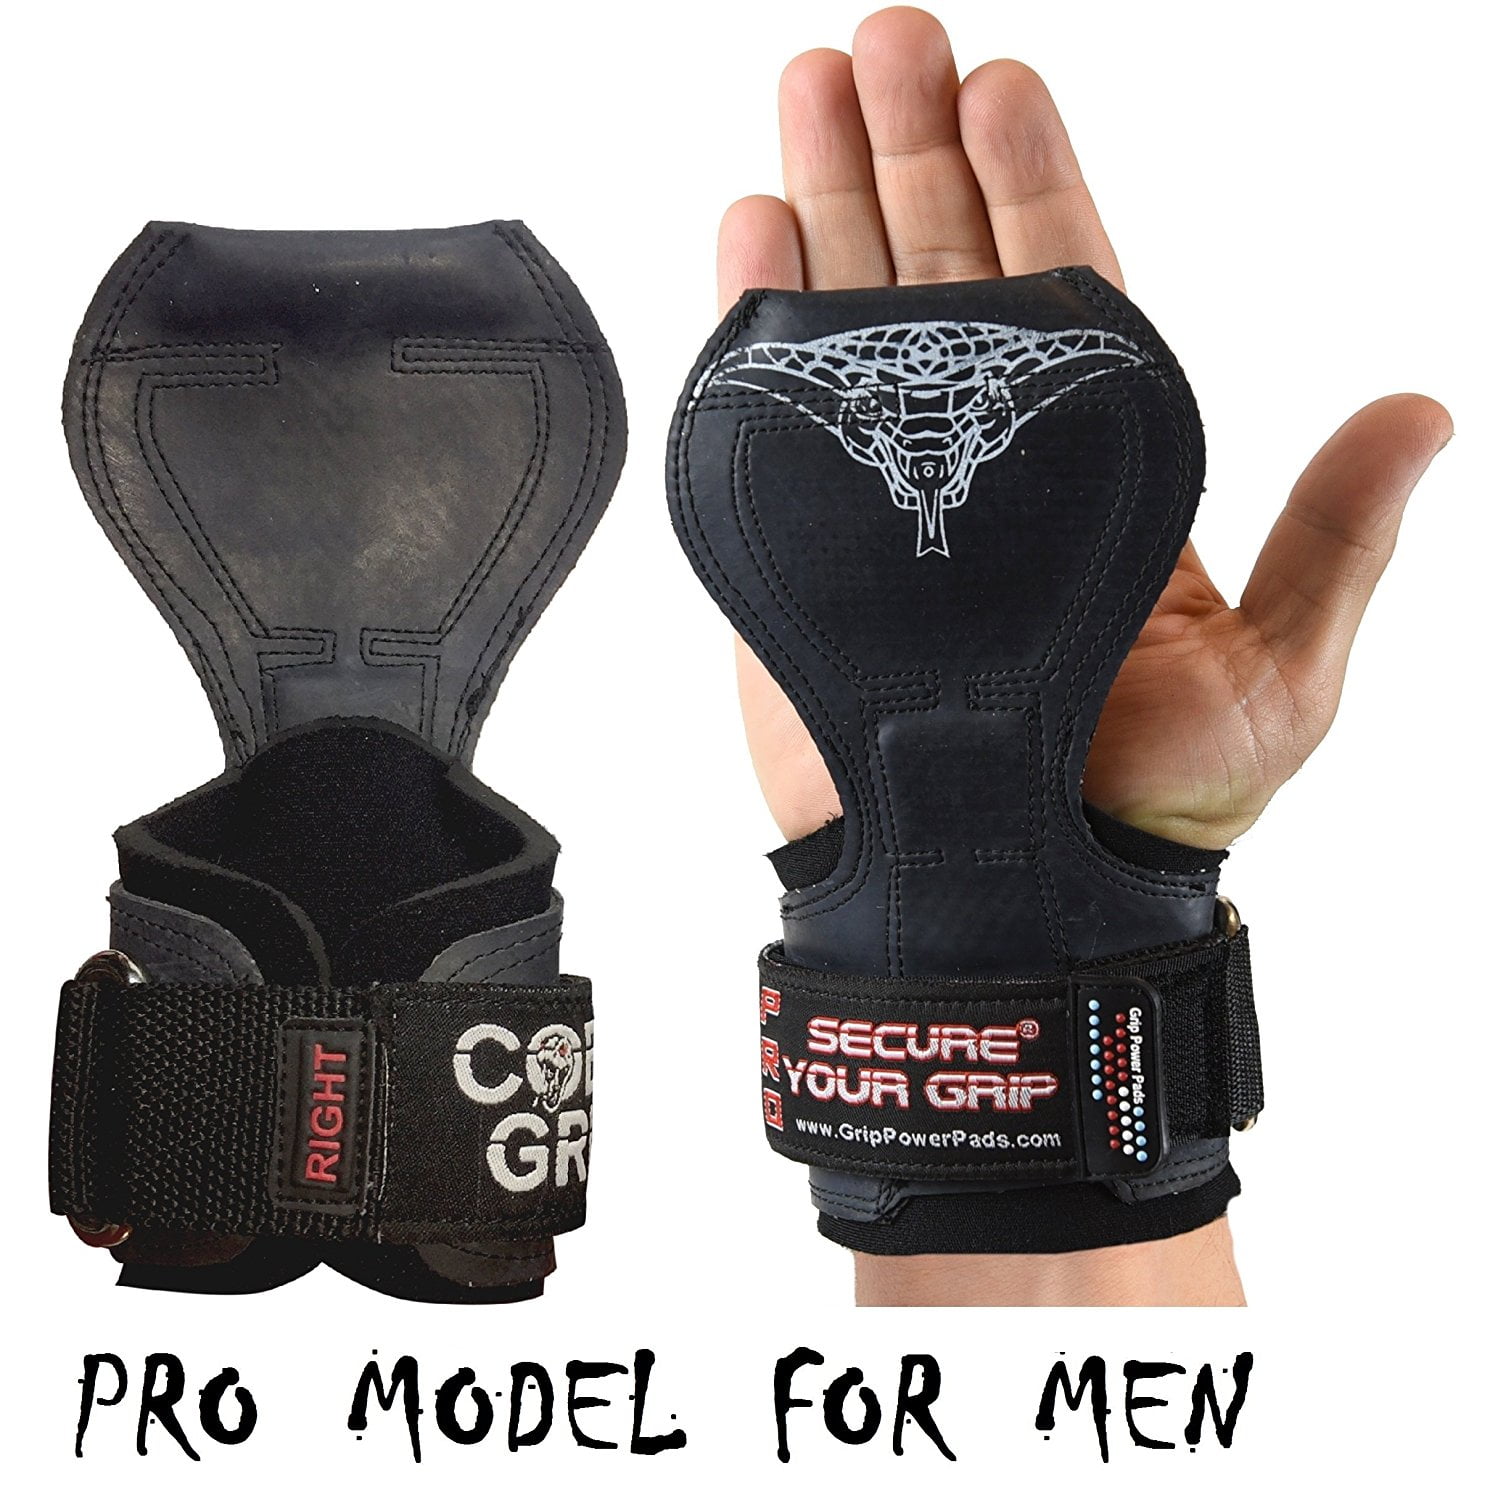 toPOWER grip pads fitness - hand protection neoprene workout gym gloves 